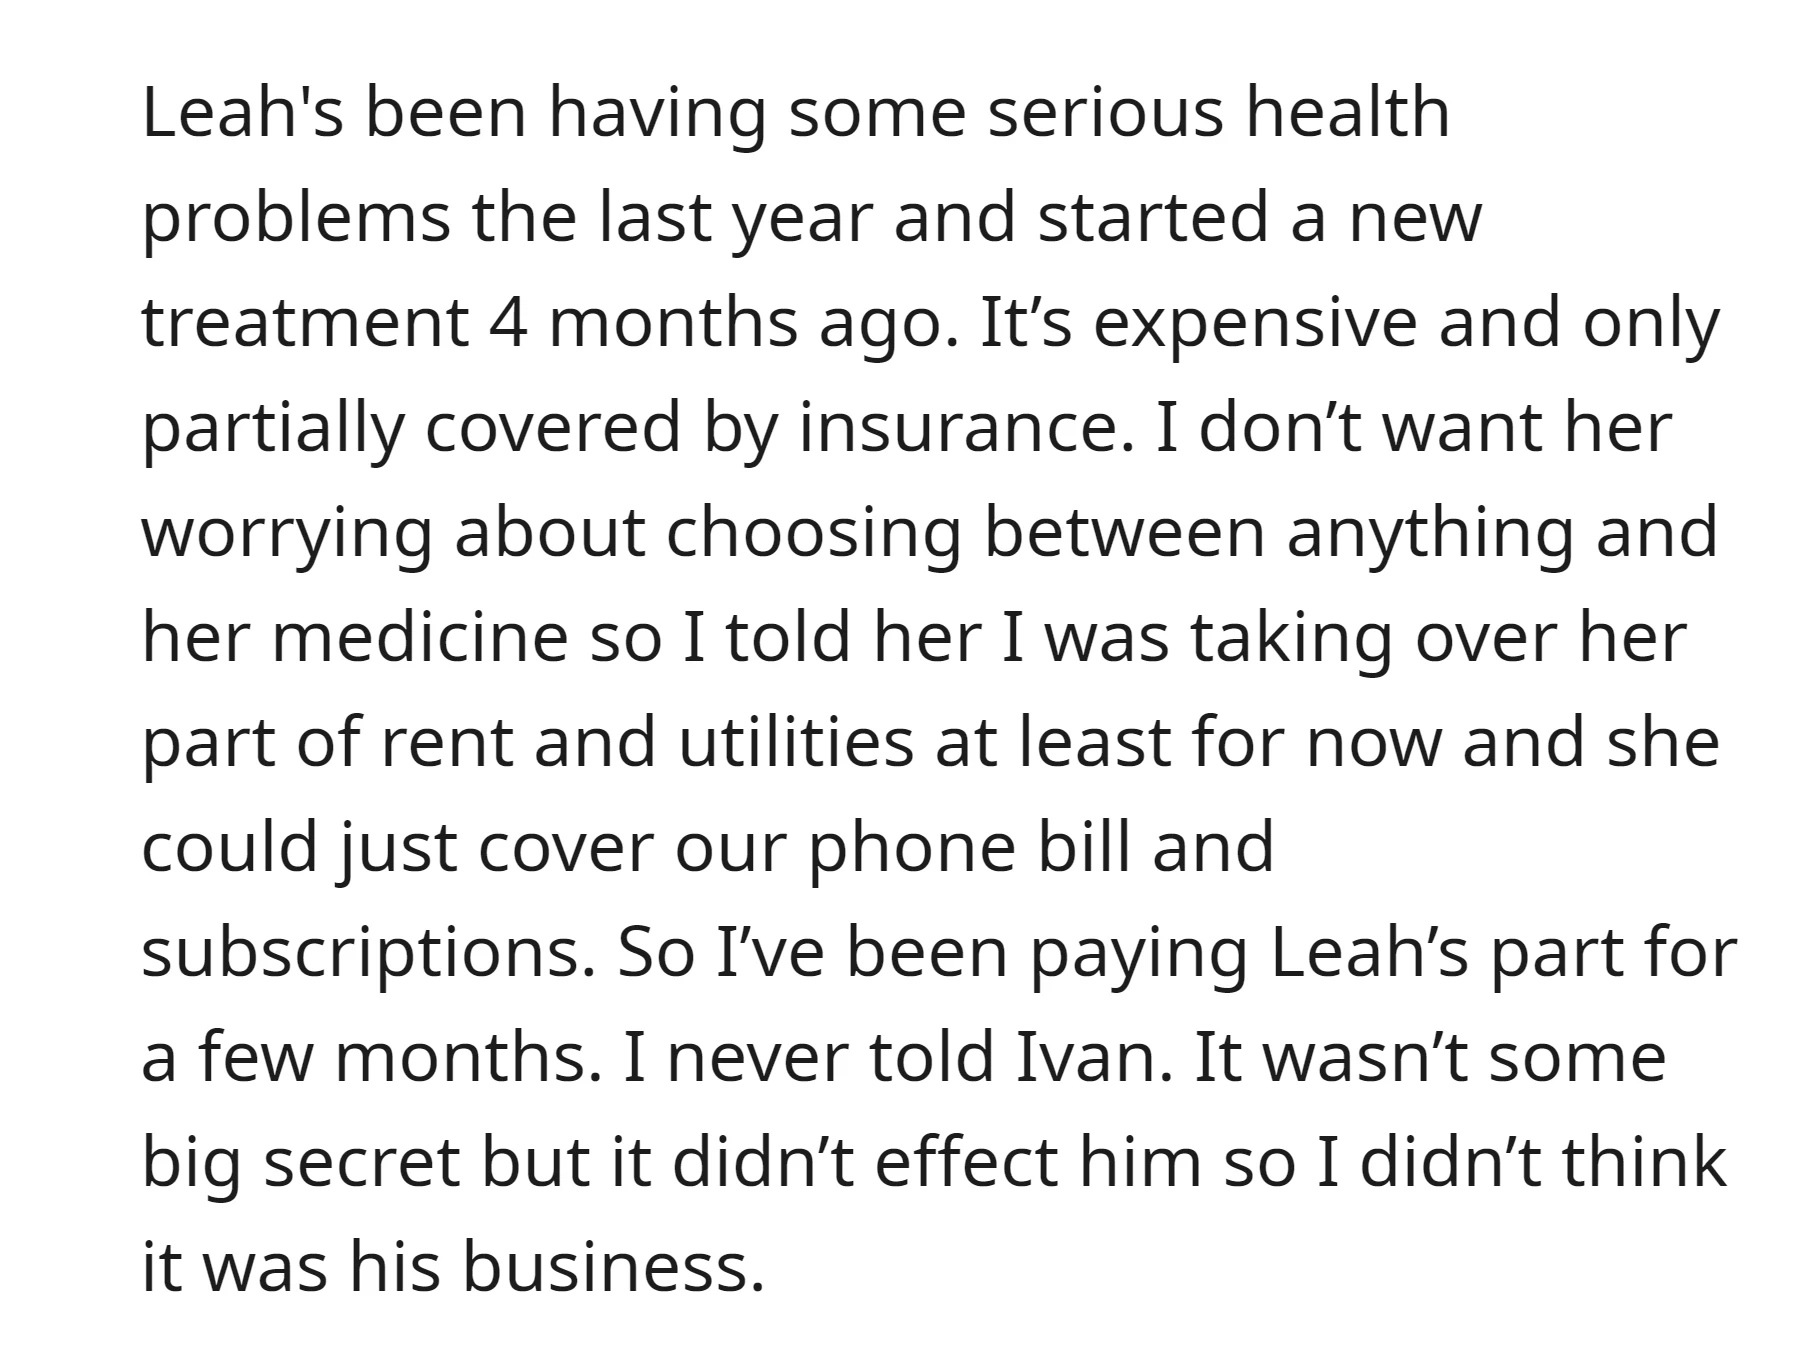 Due to Leah's health issues, the OP has been covering her share of rent and utilities without informing their roommate